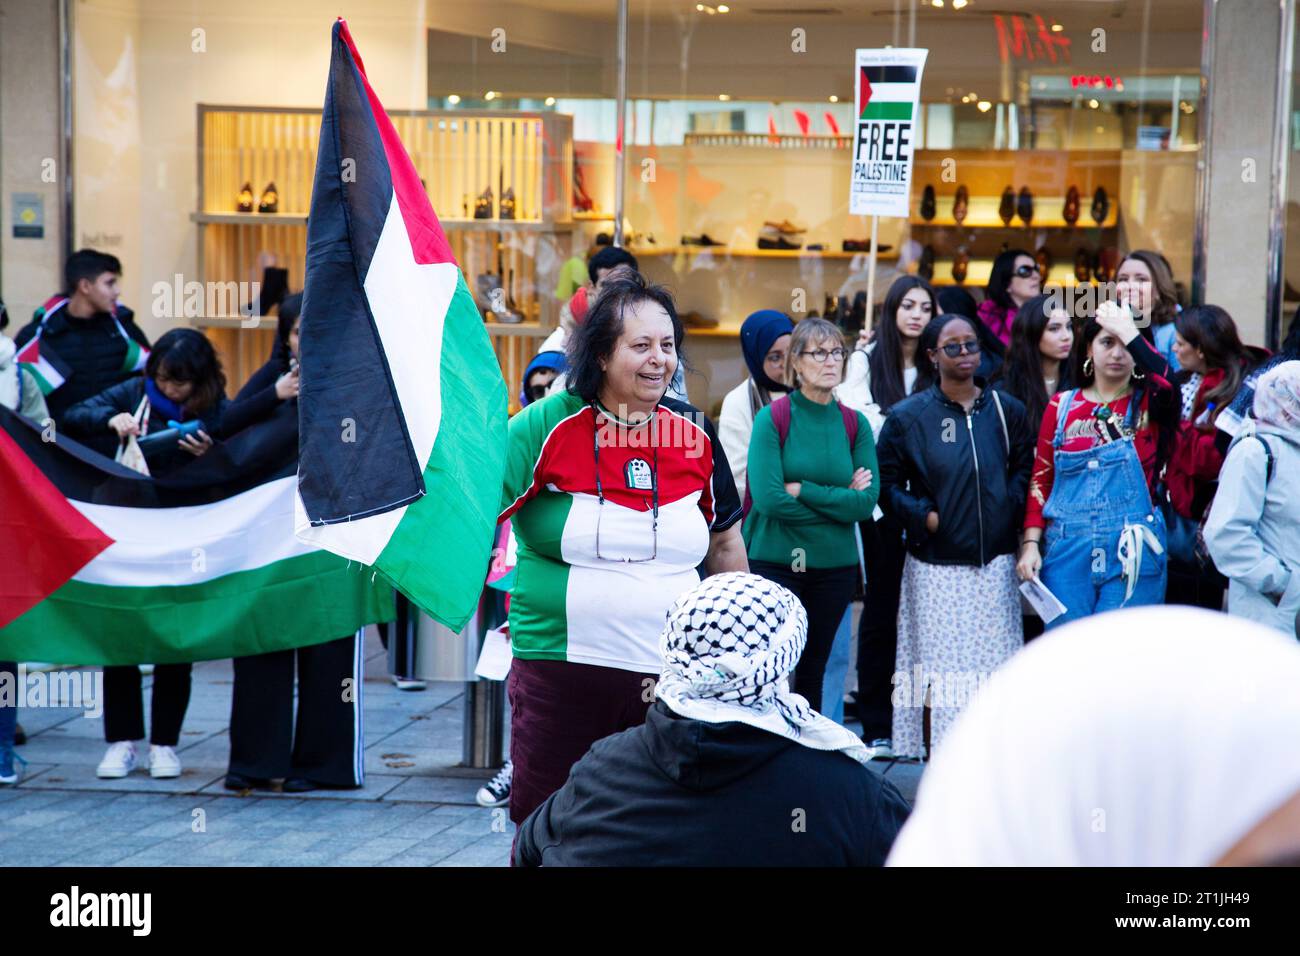 Free Palestine protest Exeter city centre - lady in centre of circle wearing Palestine football shirt Stock Photo